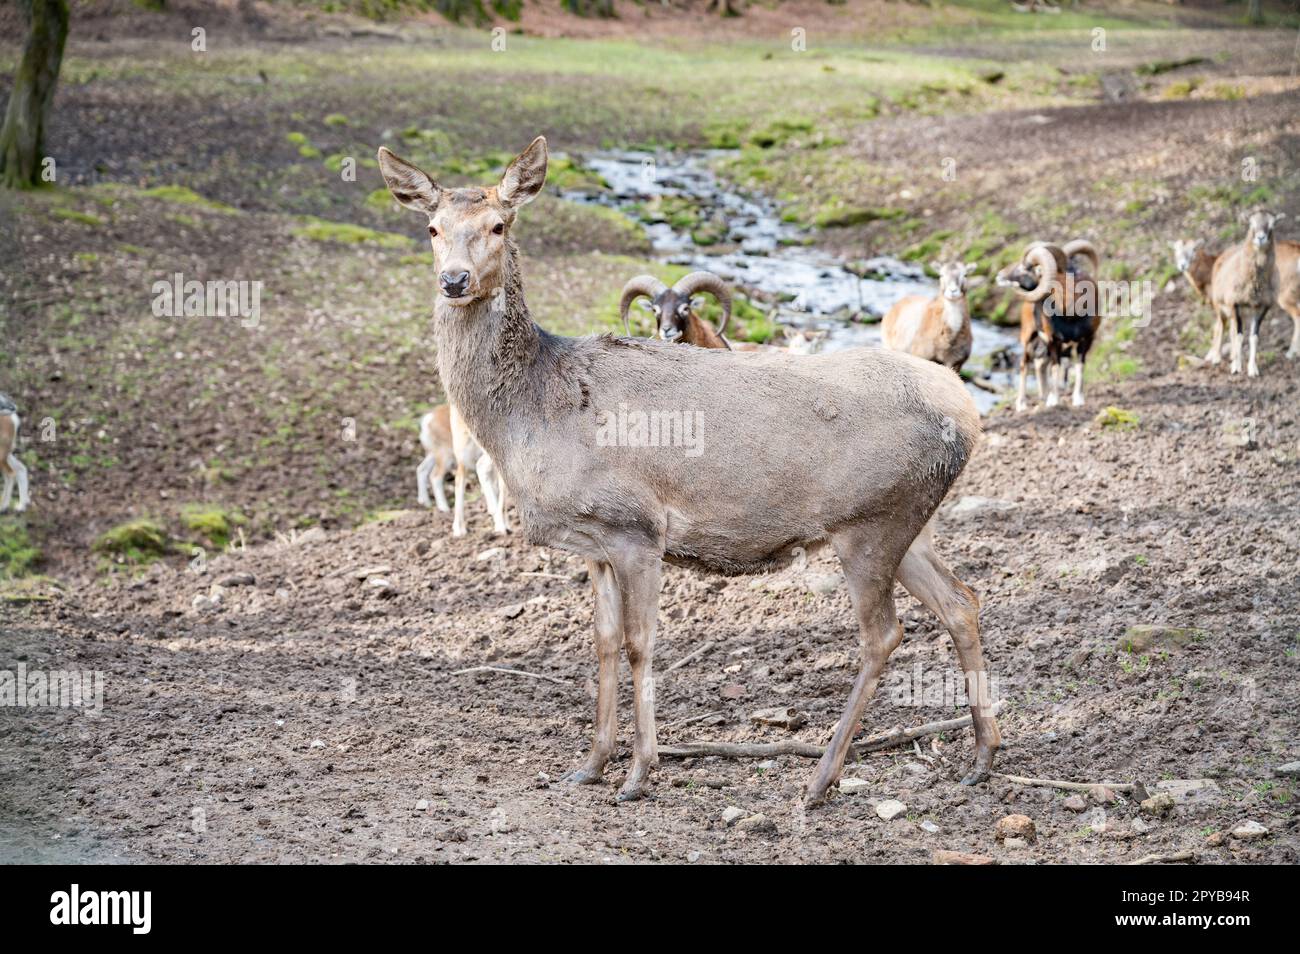 Doe, Female Deer Cow standing in front of a group of goats and billy goats, looking at camera, river in the background, Wildlife Park Brudergrund, Erbach, Germany Stock Photo